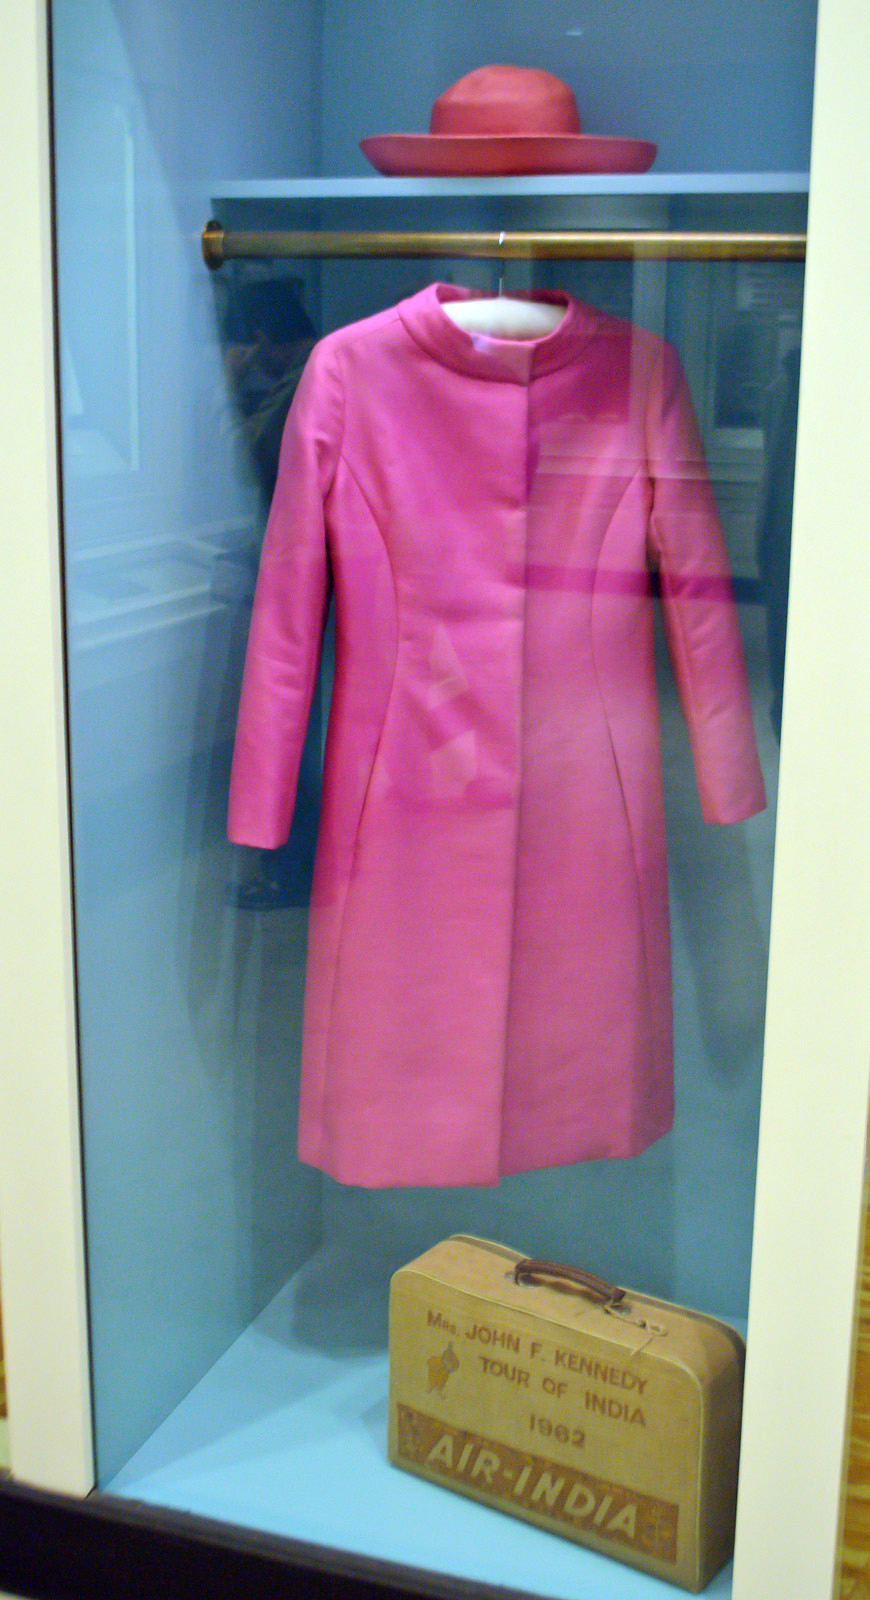 The John F. Kennedy Presidential Library, located on University of Massachusetts, Boston campus, is the only presidential library in New England and commemorates the first U.S. President of Irish and/or Roman Catholic background. First Lady Jacqueline Bouvier Kennedy brought an iconic glamour to the White House. This pink hat-coat ensemble was worn during her tour of India in 1962. Photo by InSapphoWeTrust, flickr.com.